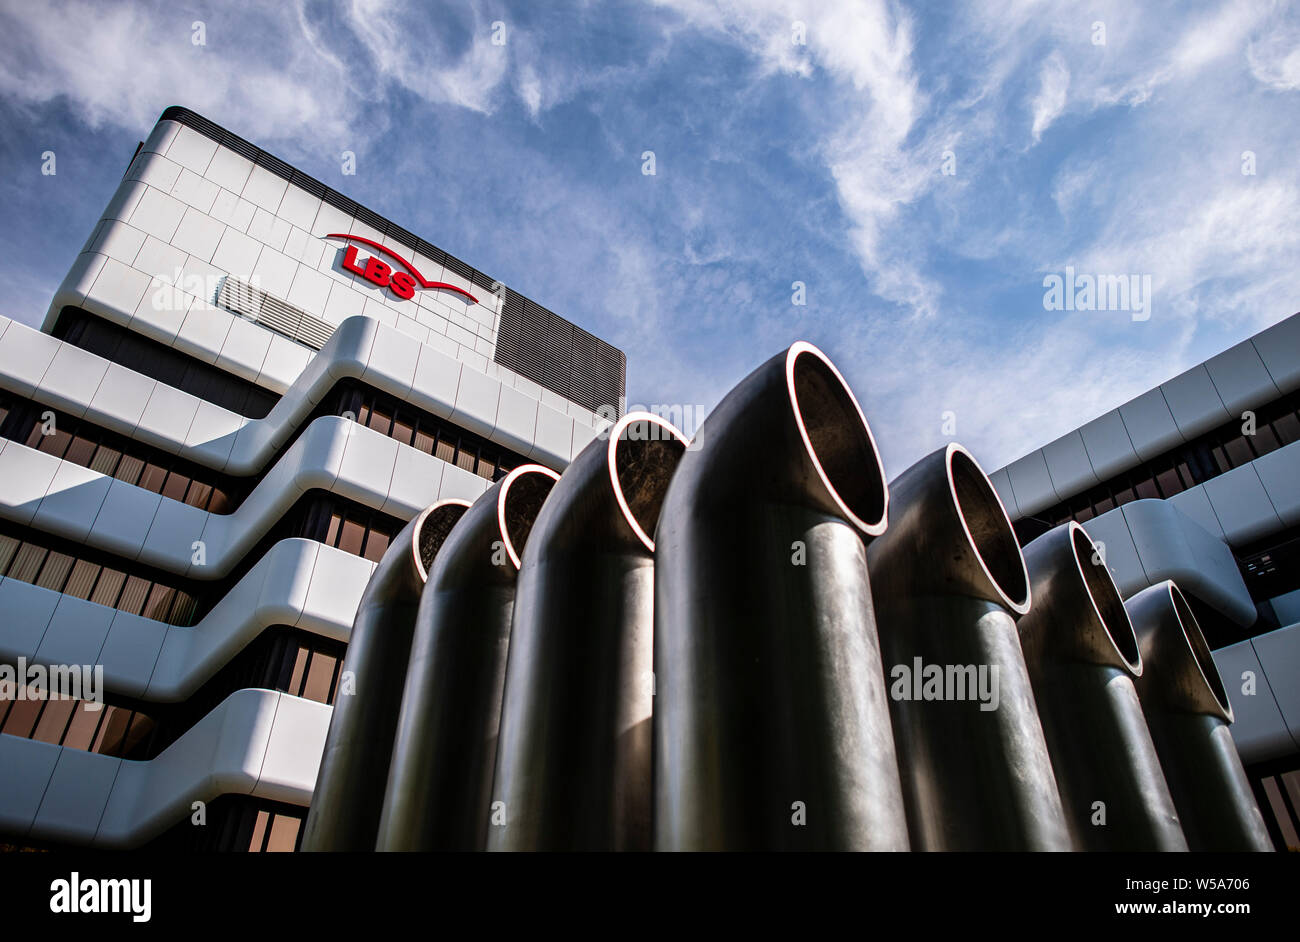 Lbs Landesbausparkasse High Resolution Stock Photography and Images - Alamy